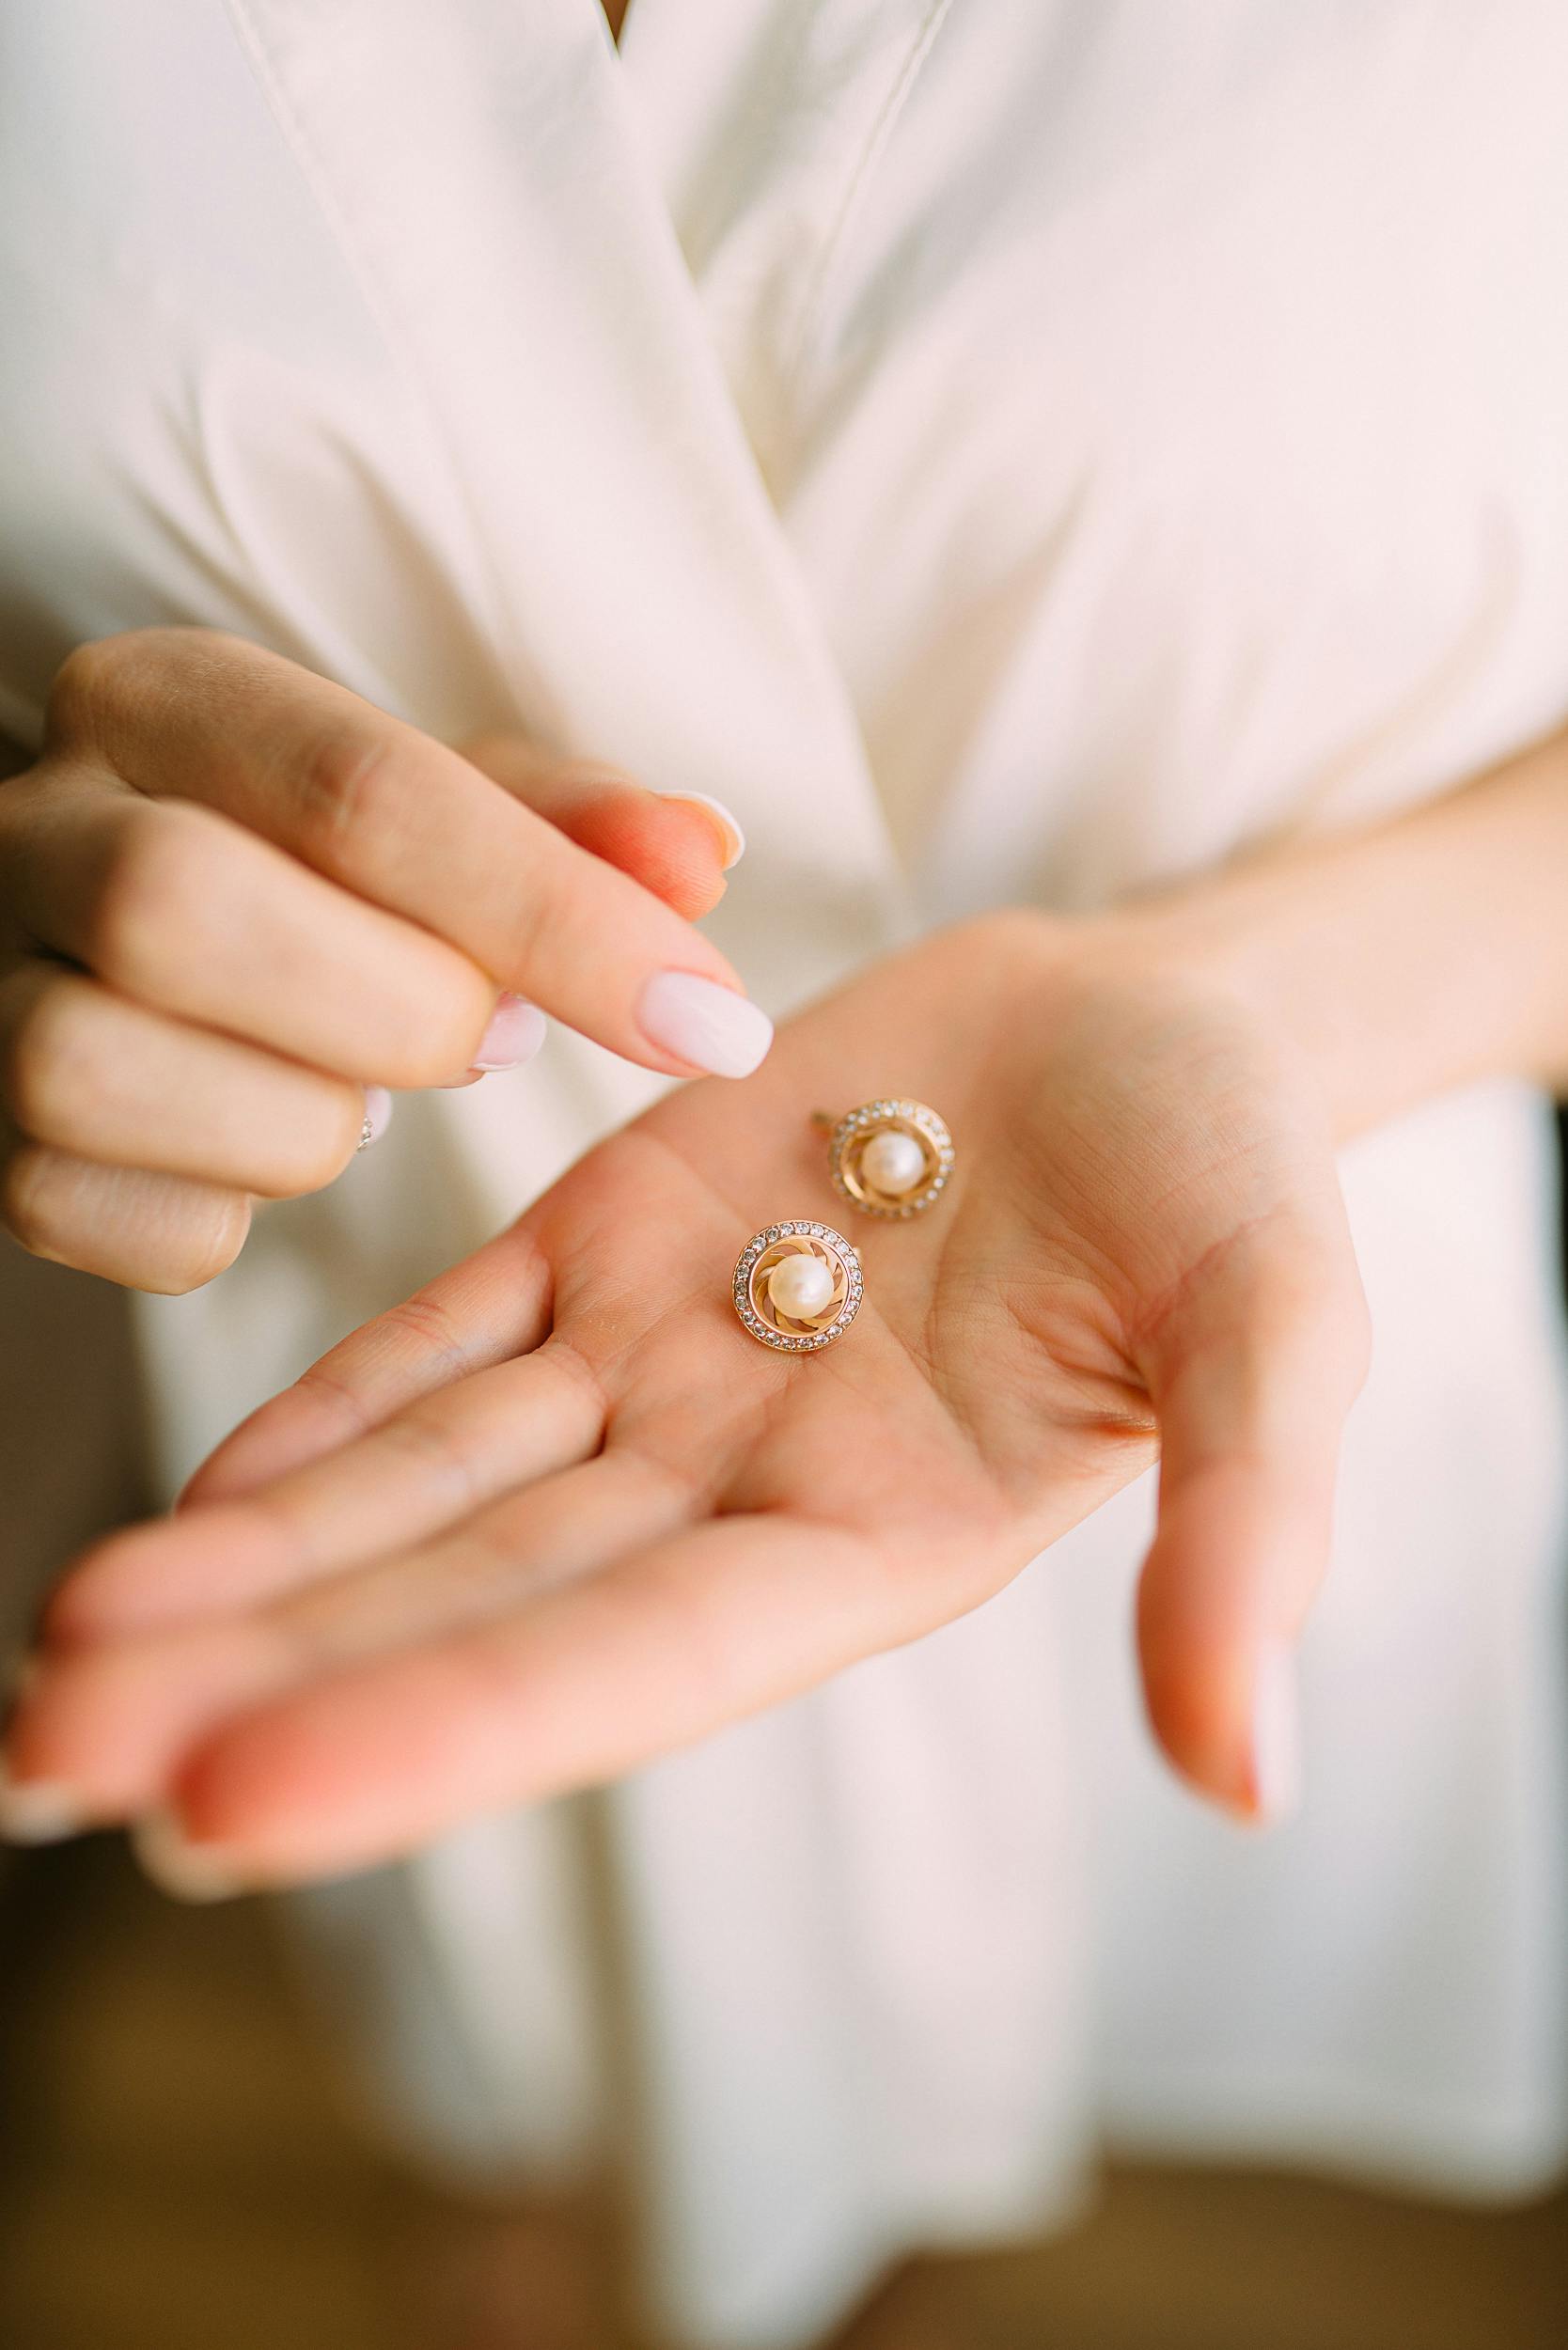 A woman holding a pair of earrings | Source: Pexels